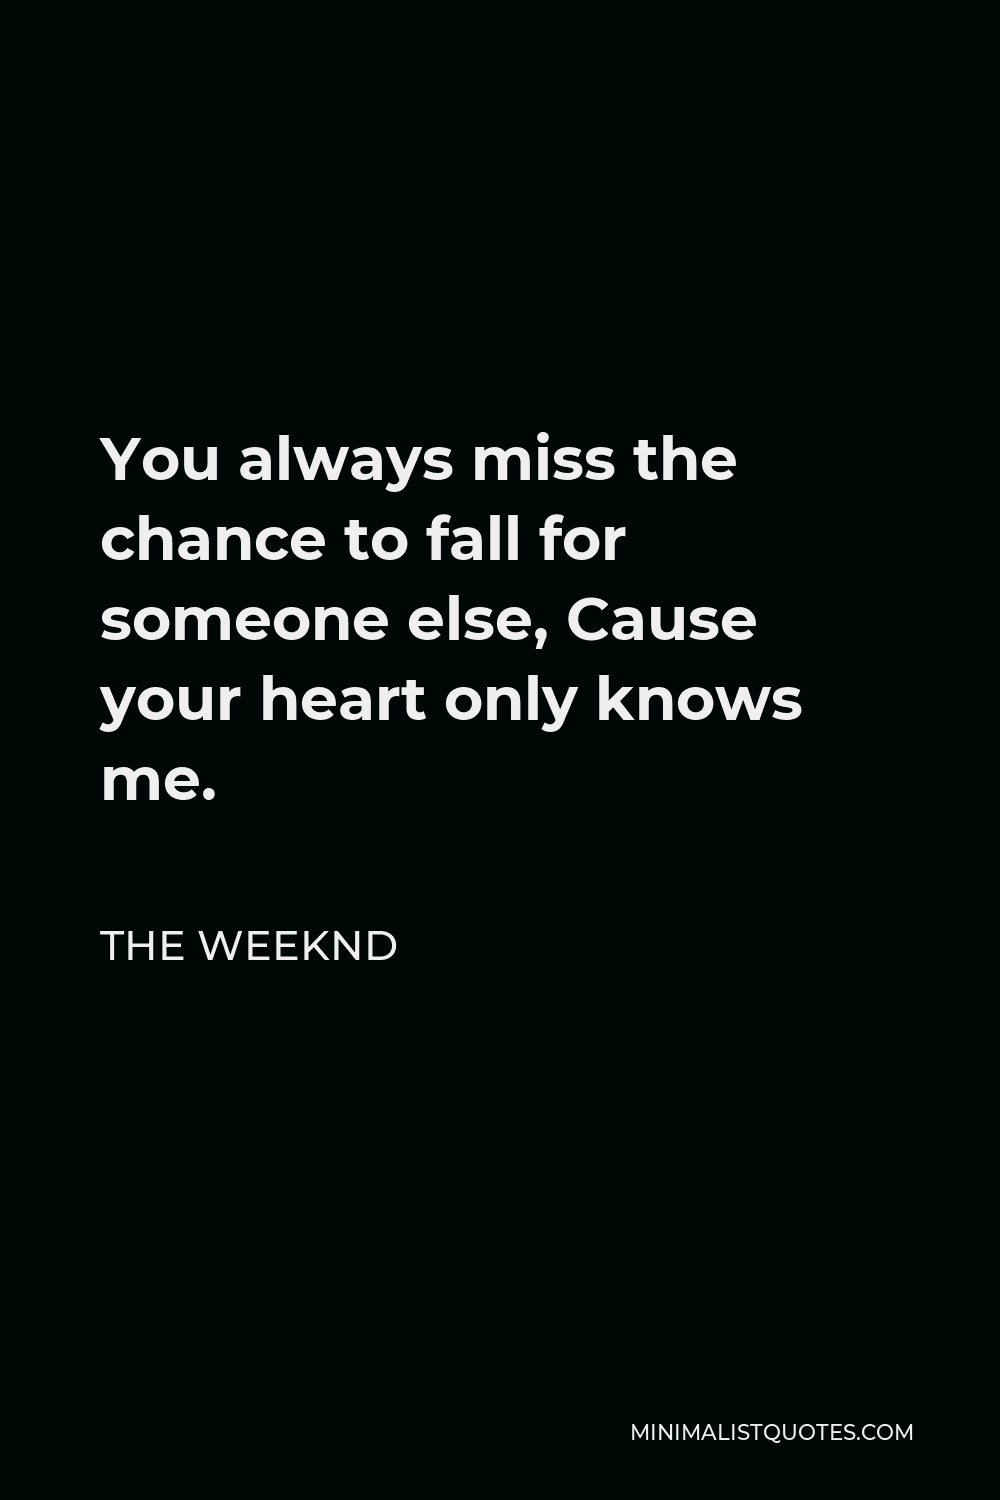 The Weeknd Quote - You always miss the chance to fall for someone else, Cause your heart only knows me.